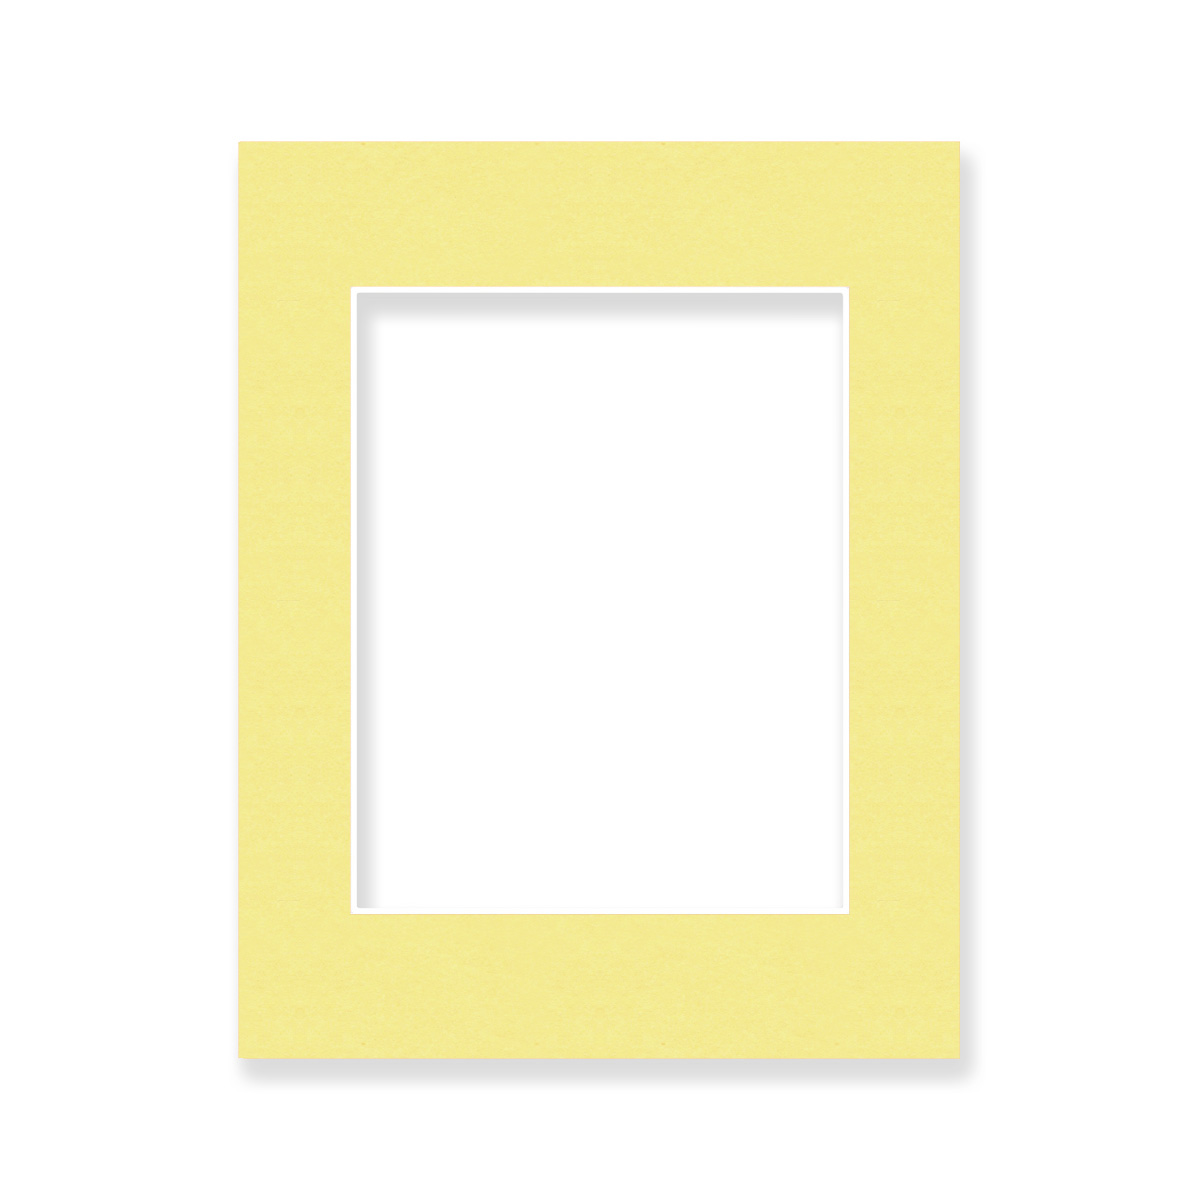 Smooth White 11x14 White Picture Mats with White Core for 8x10 Pictures -  Fits 11x14 Frame 